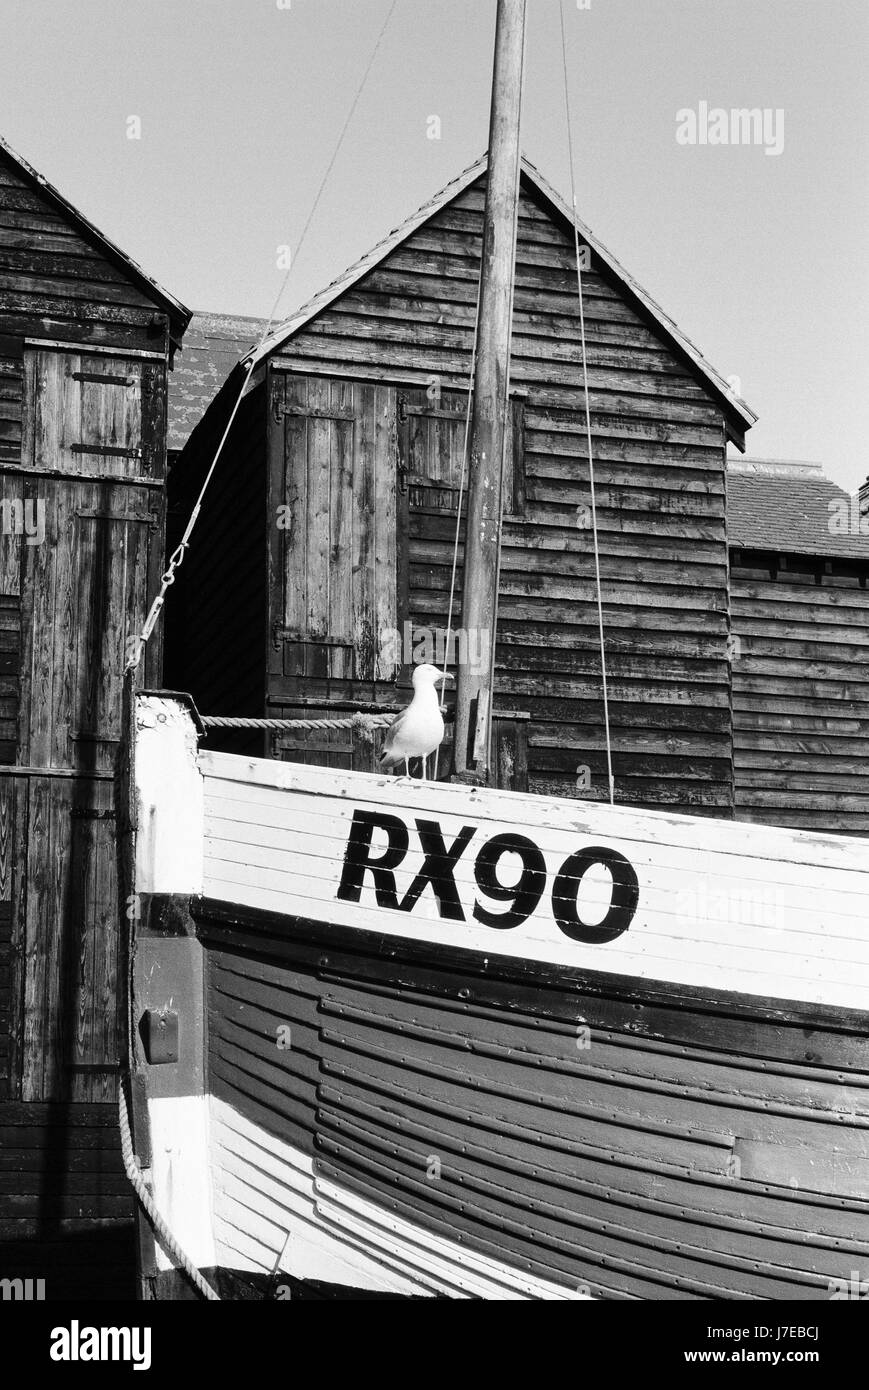 Net Sheds and fishing boat on The Stade at Hastings, East Sussex, UK Stock Photo